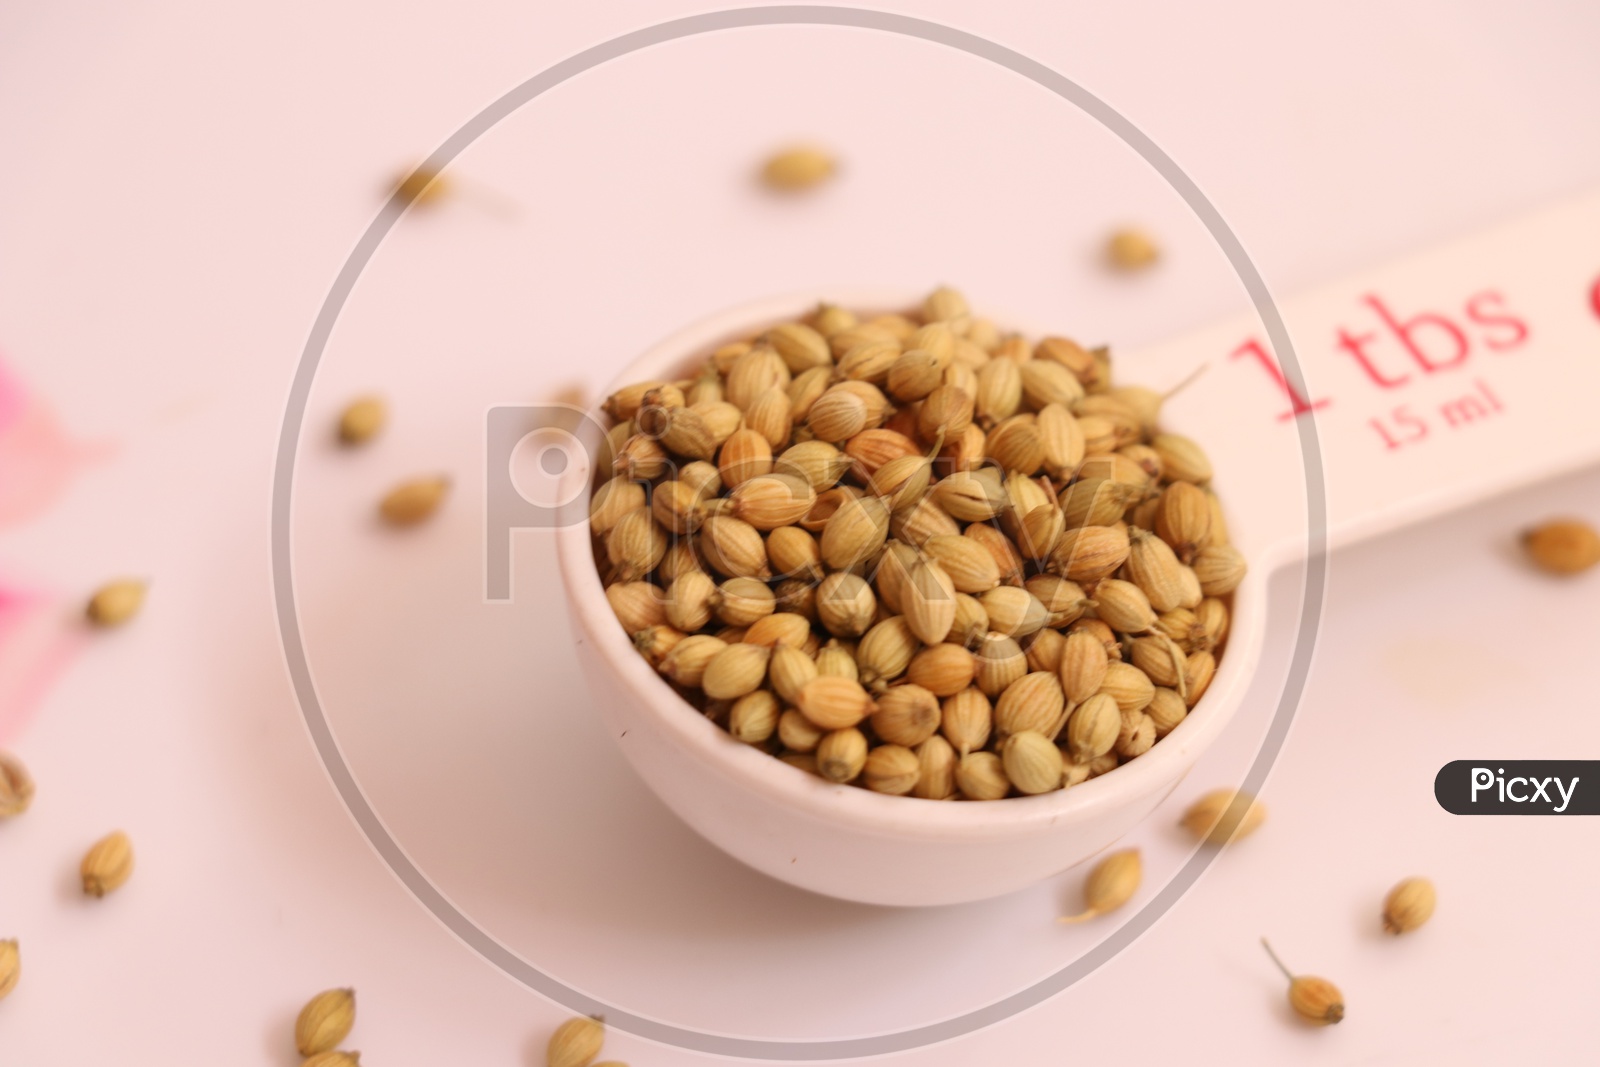 One tablespoon of whole and dried coriander seeds